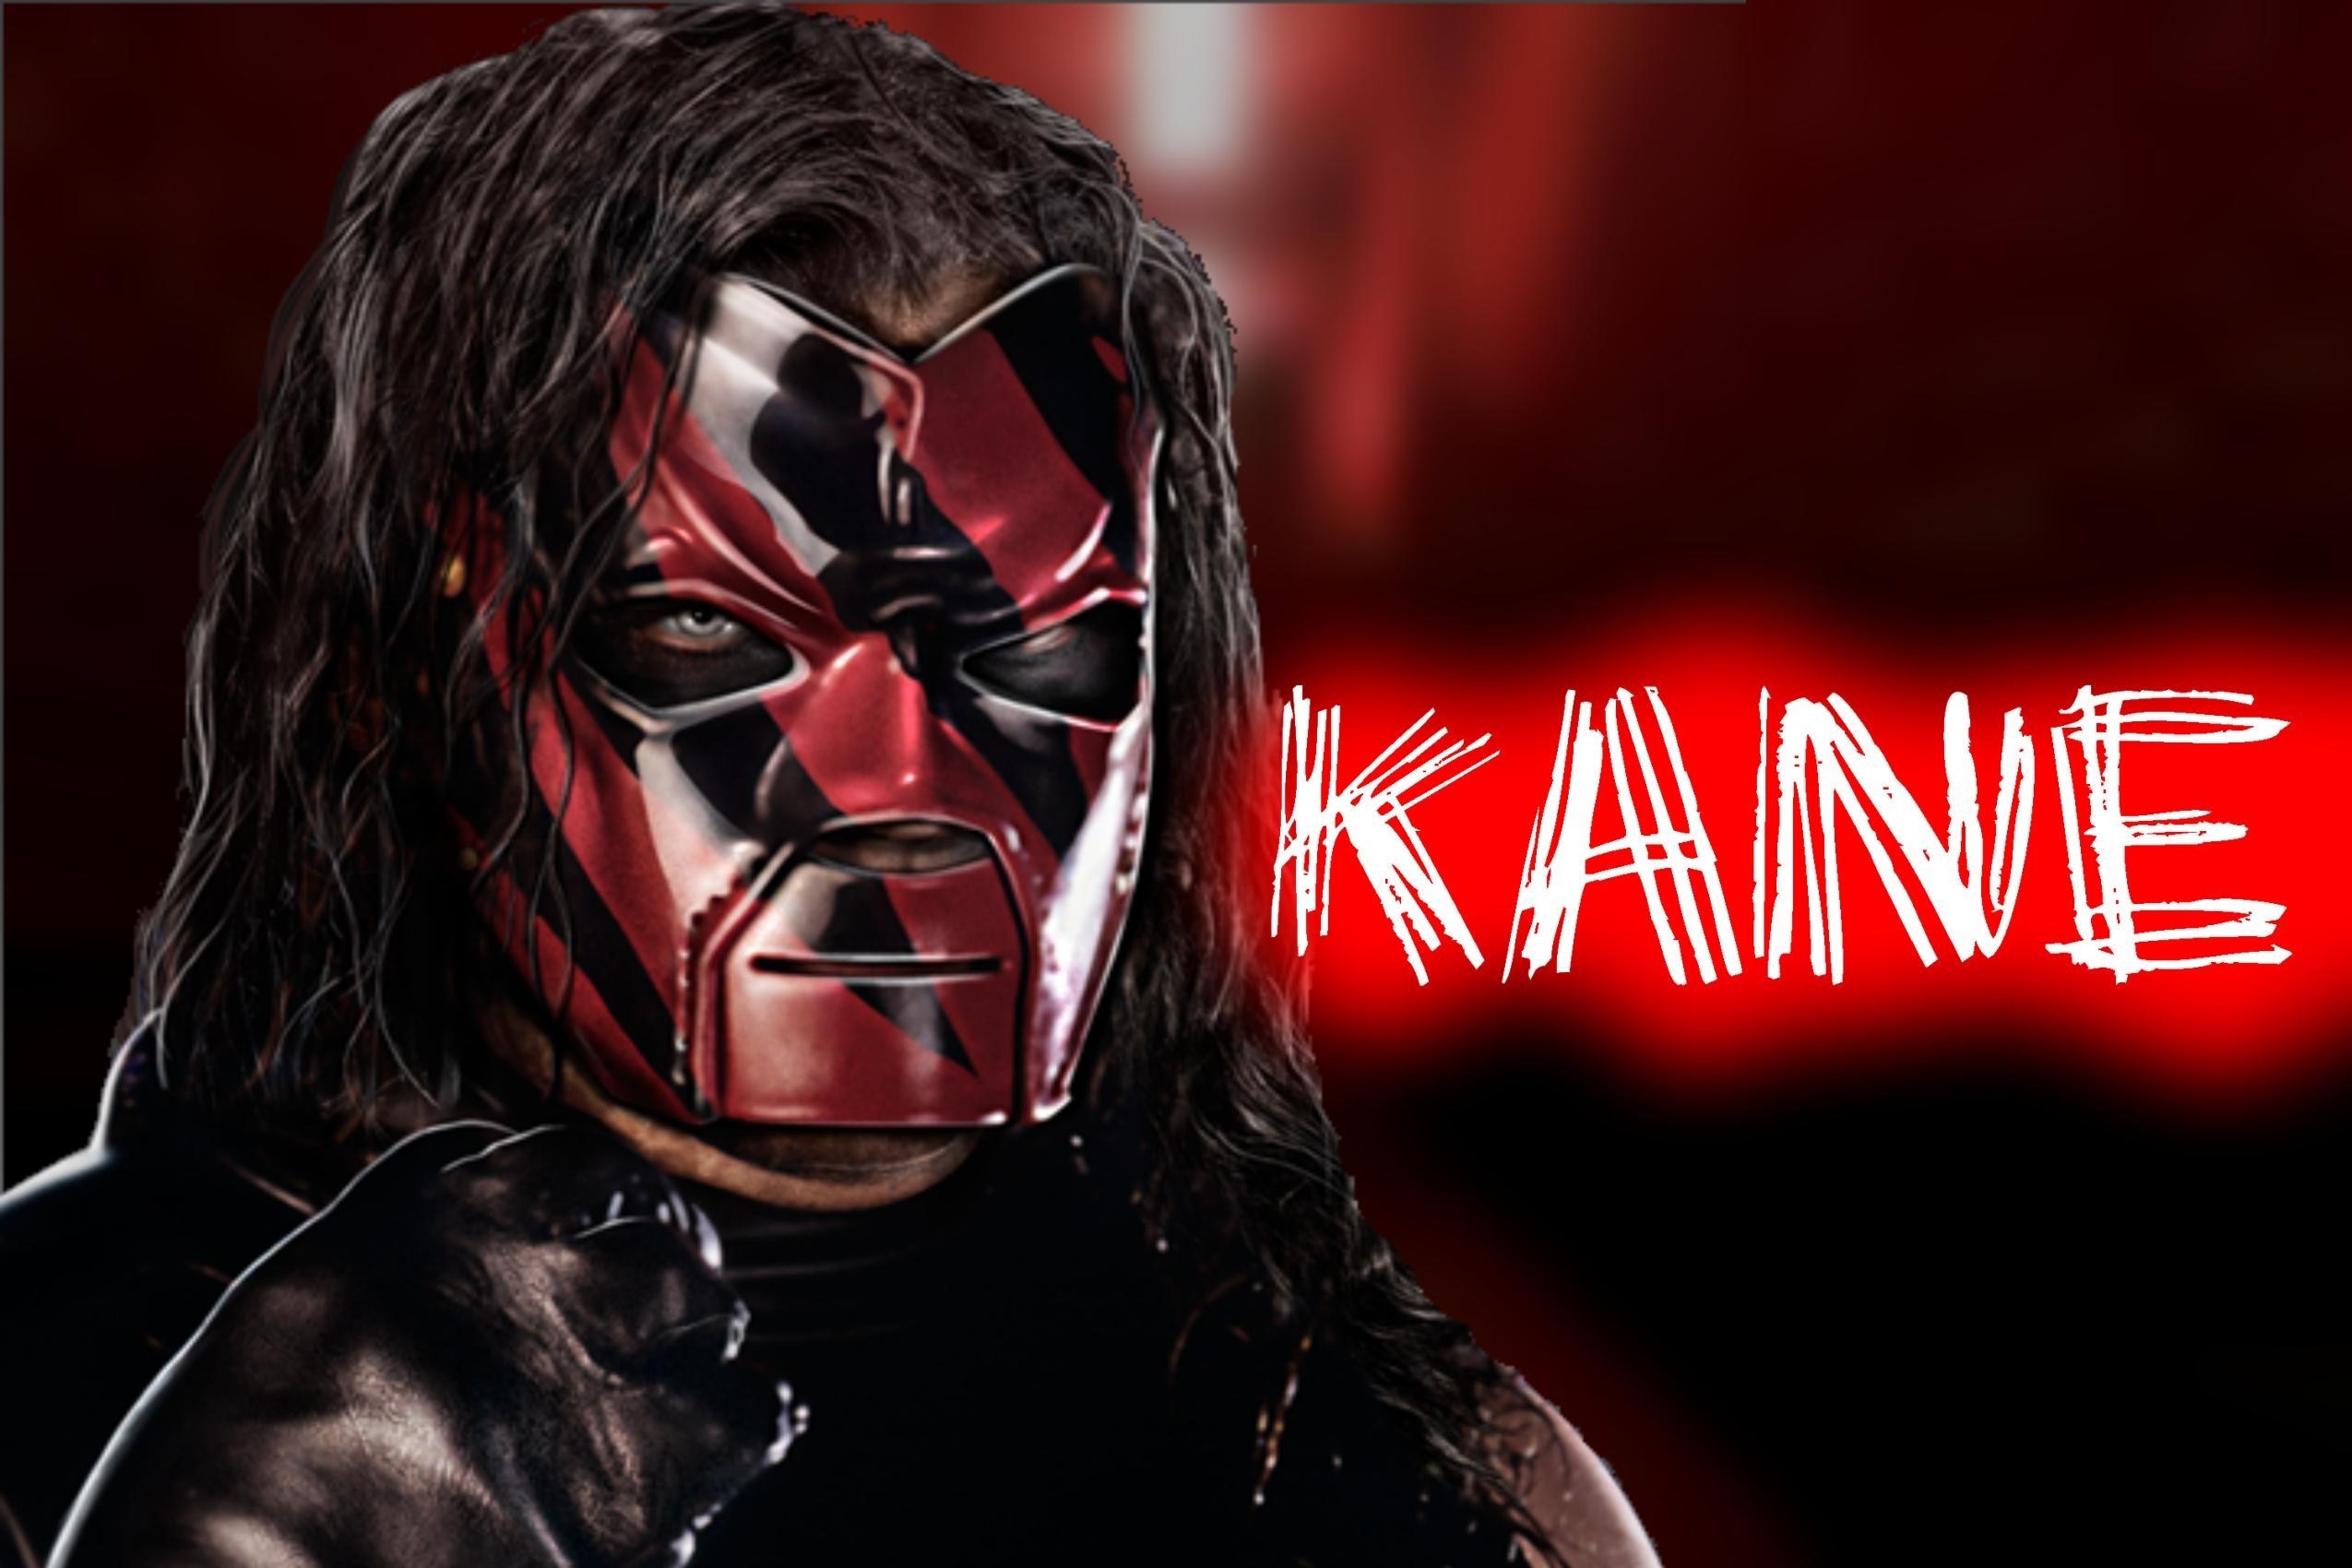 Kane Wrestler Quotes For Your